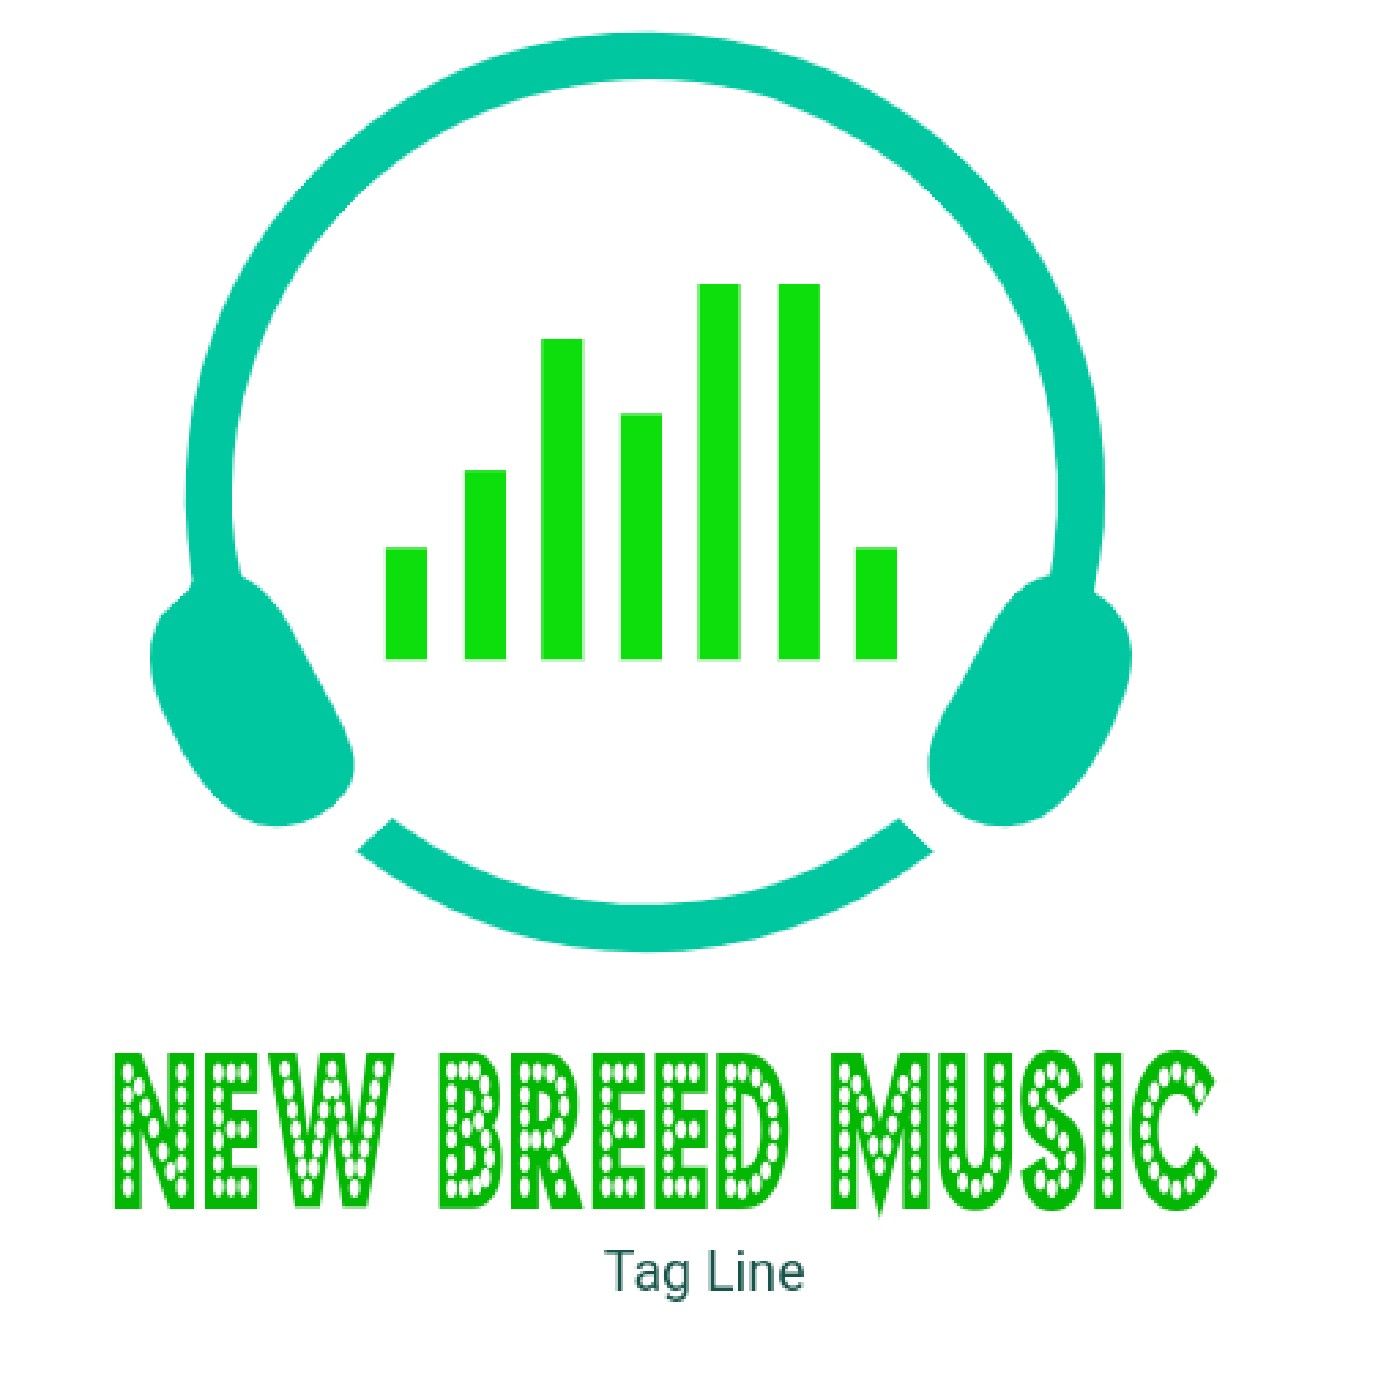 New Breed Music